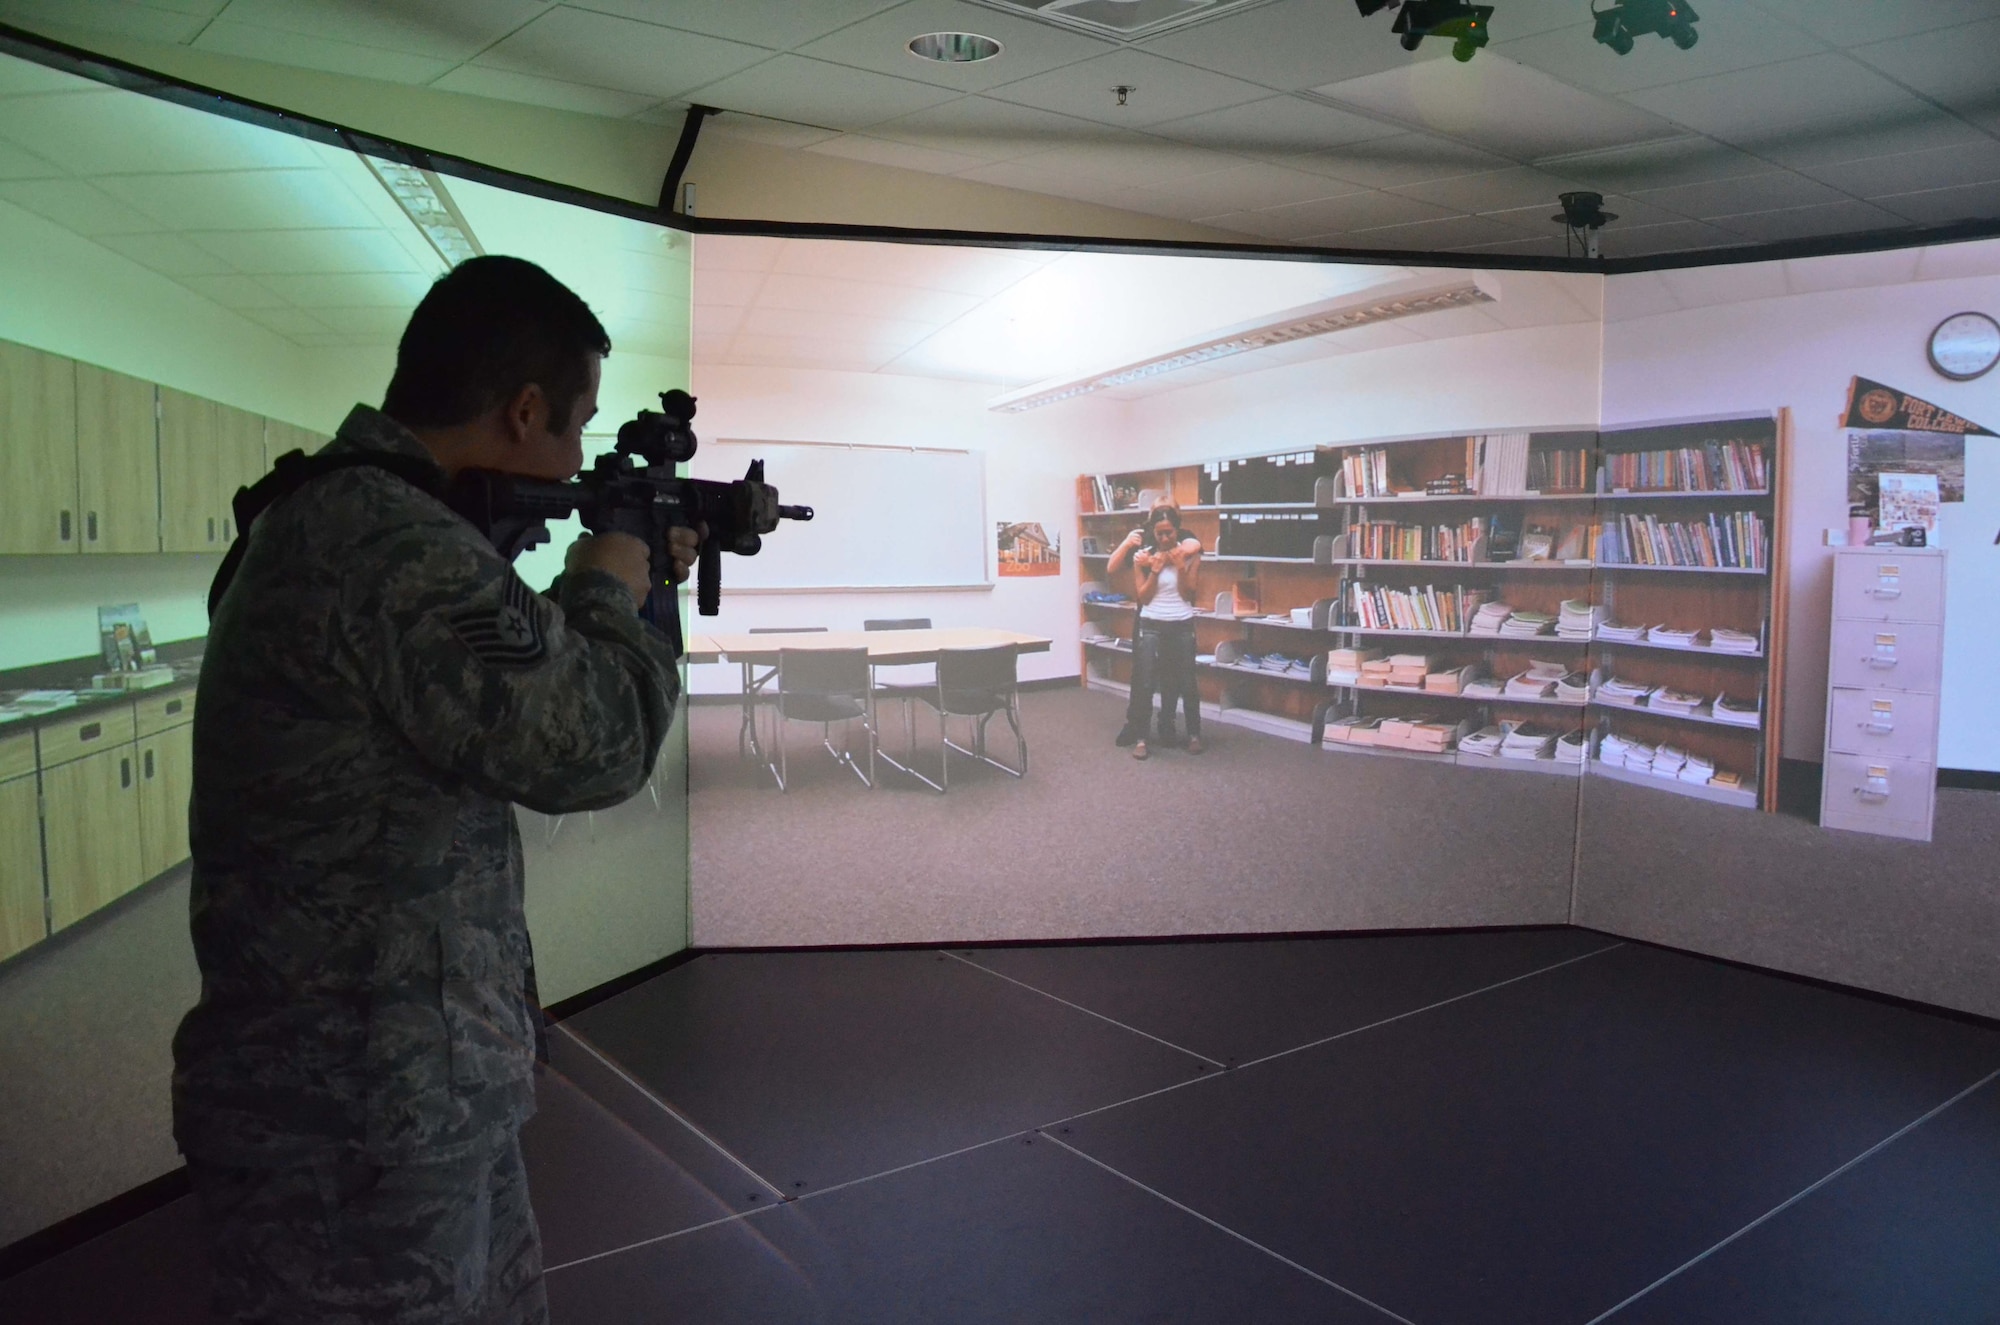 Tech. Sgt. Scott Buske, a spectral analysis section chief with the 21st Surveillance Squadron, Air Force Technical Applications Center, Patrick AFB, Fla., takes aim at a virtual active shooter using VirTra, a 300-degree wrap-around simulator used by members of the 45th Security Forces Squadron.  Buske and 17 members of his squadron spent a day with the law enforcement agents to learn more about how they protect the base. (U.S. Air Force photo by Susan A. Romano)